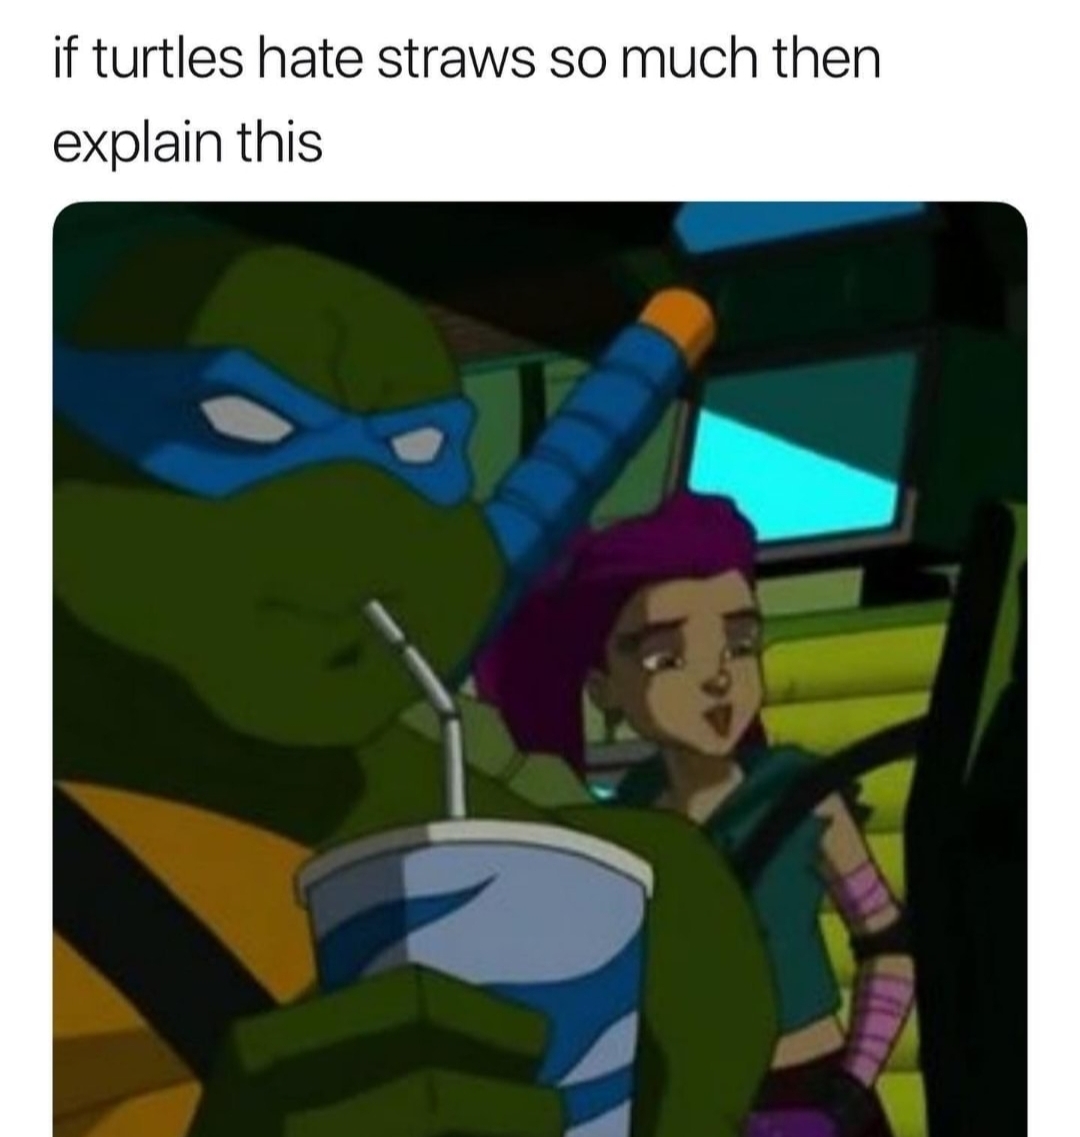 if turtles hate straws so much explain - if turtles hate straws so much then explain this